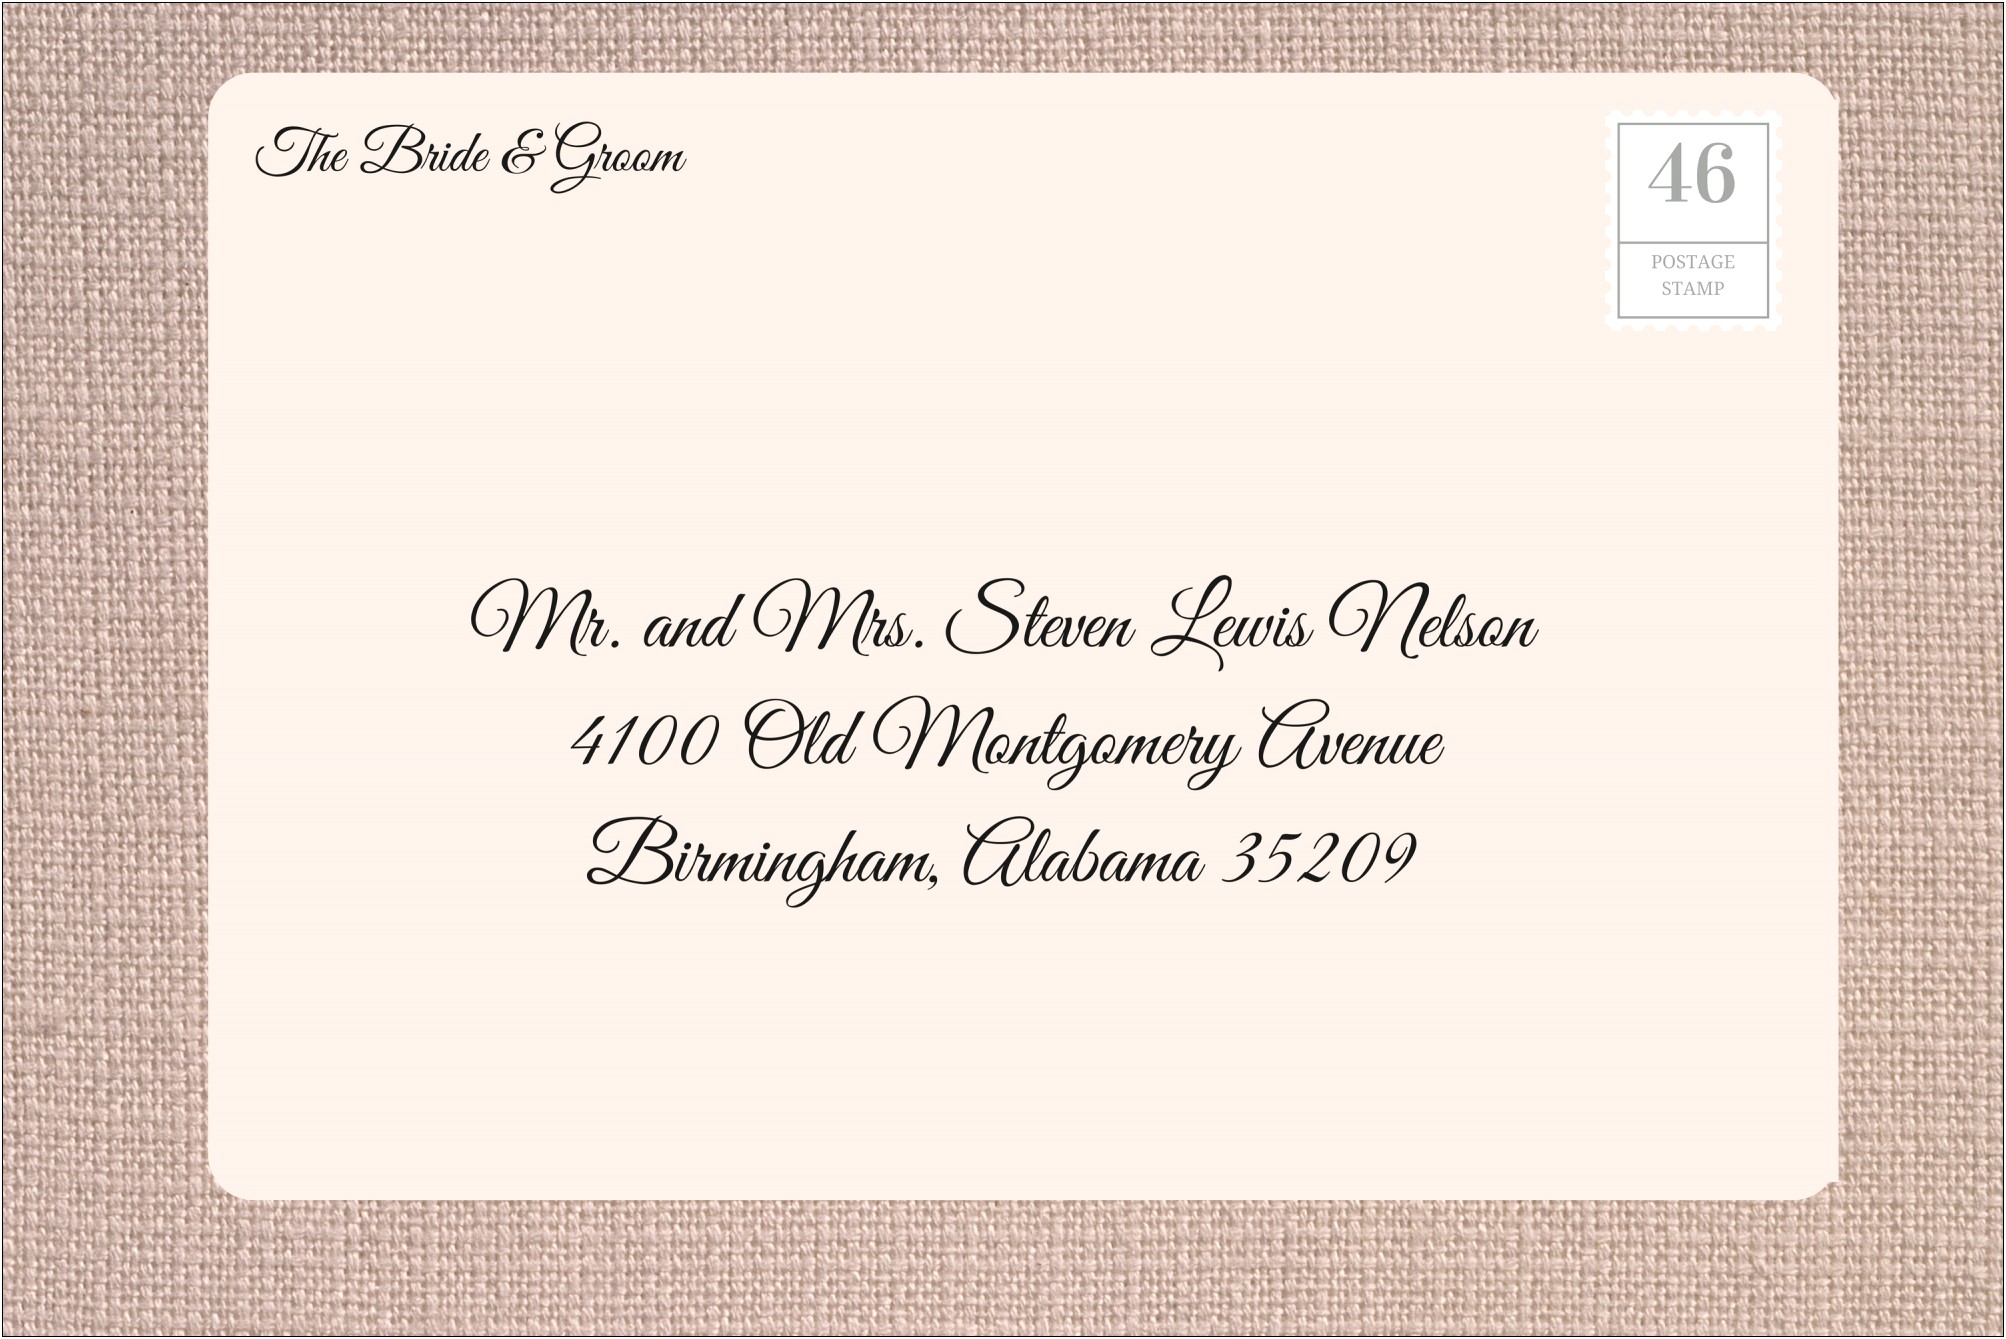 Proper Way To Address Wedding Invitations With Guest